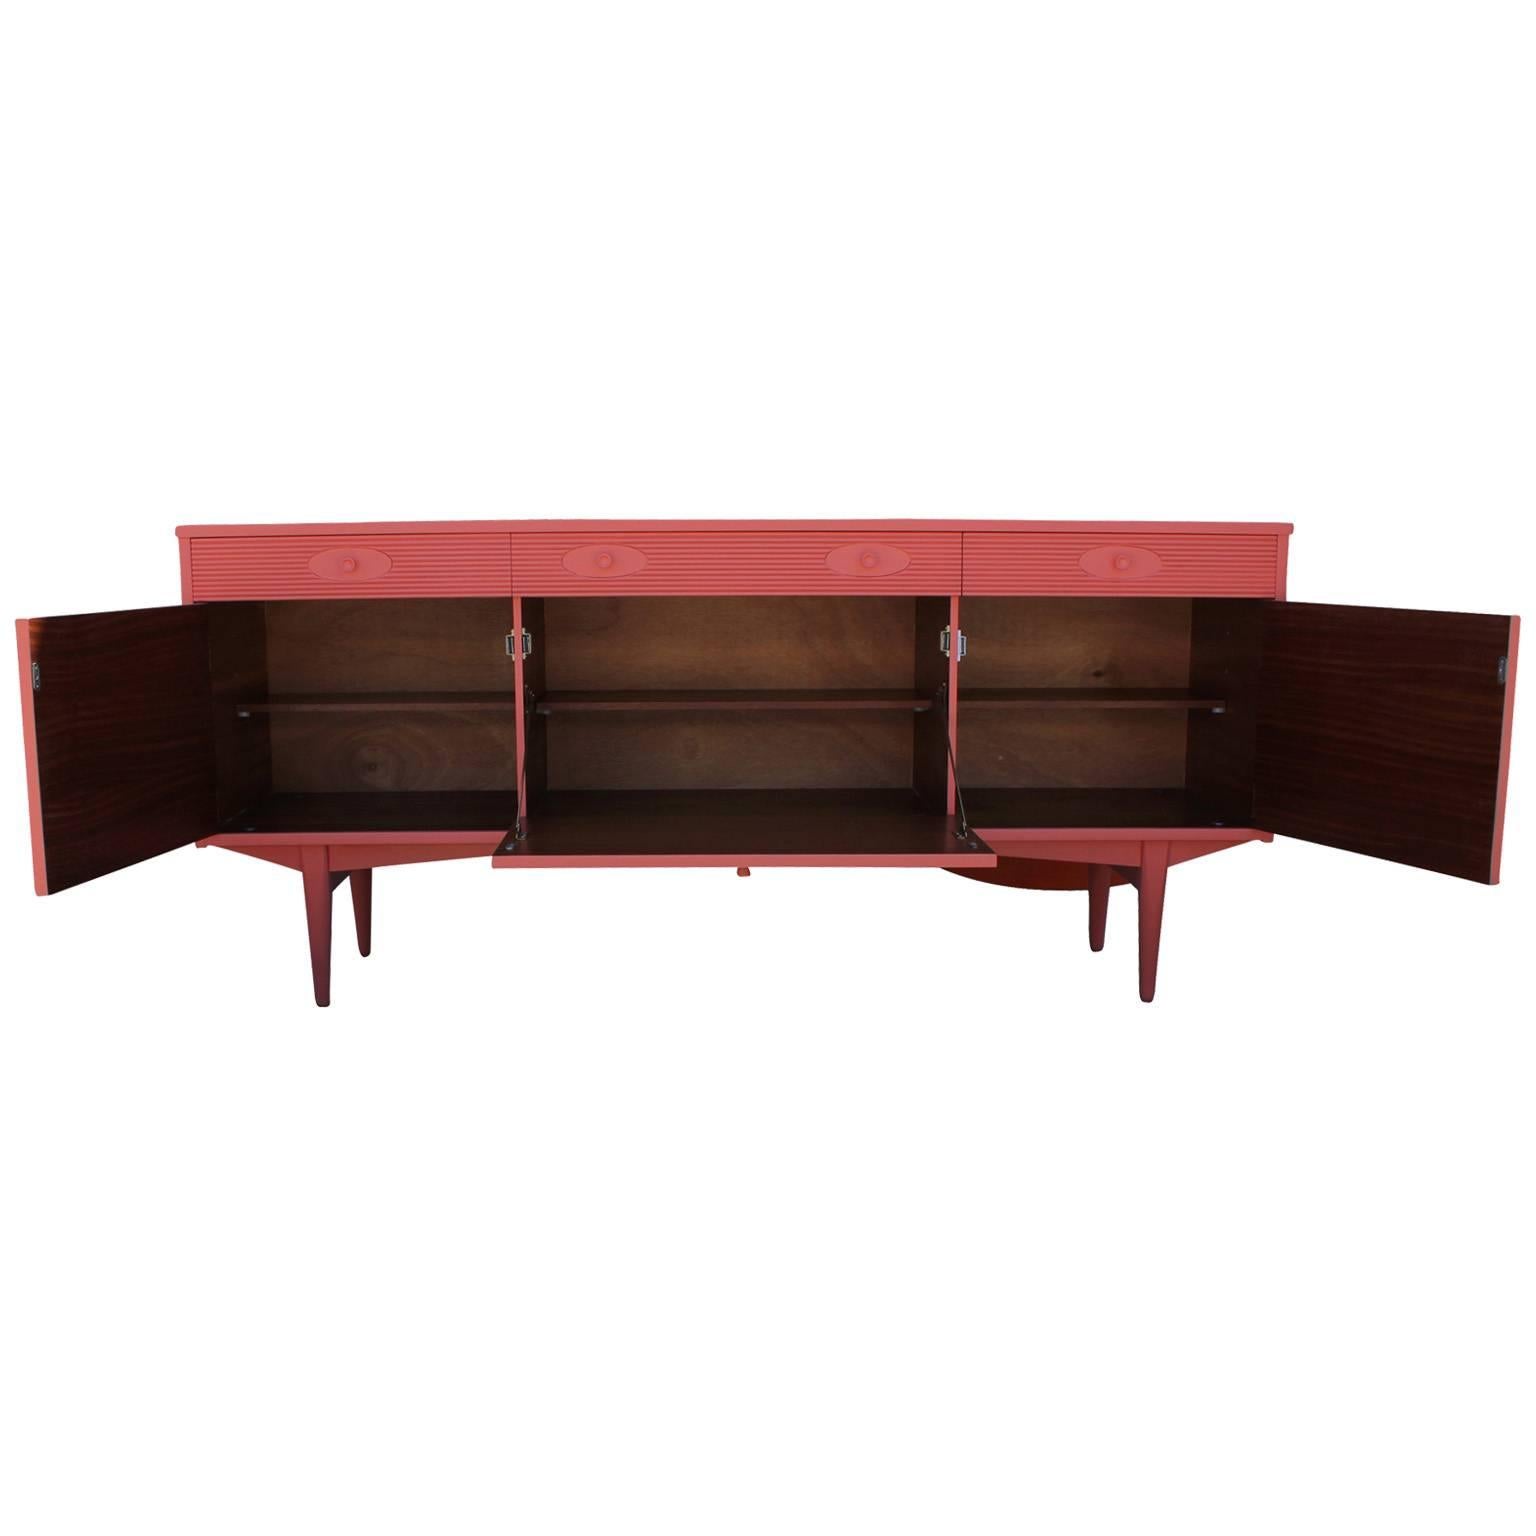 European Stunning Glossy Coral Lacquered Sideboard